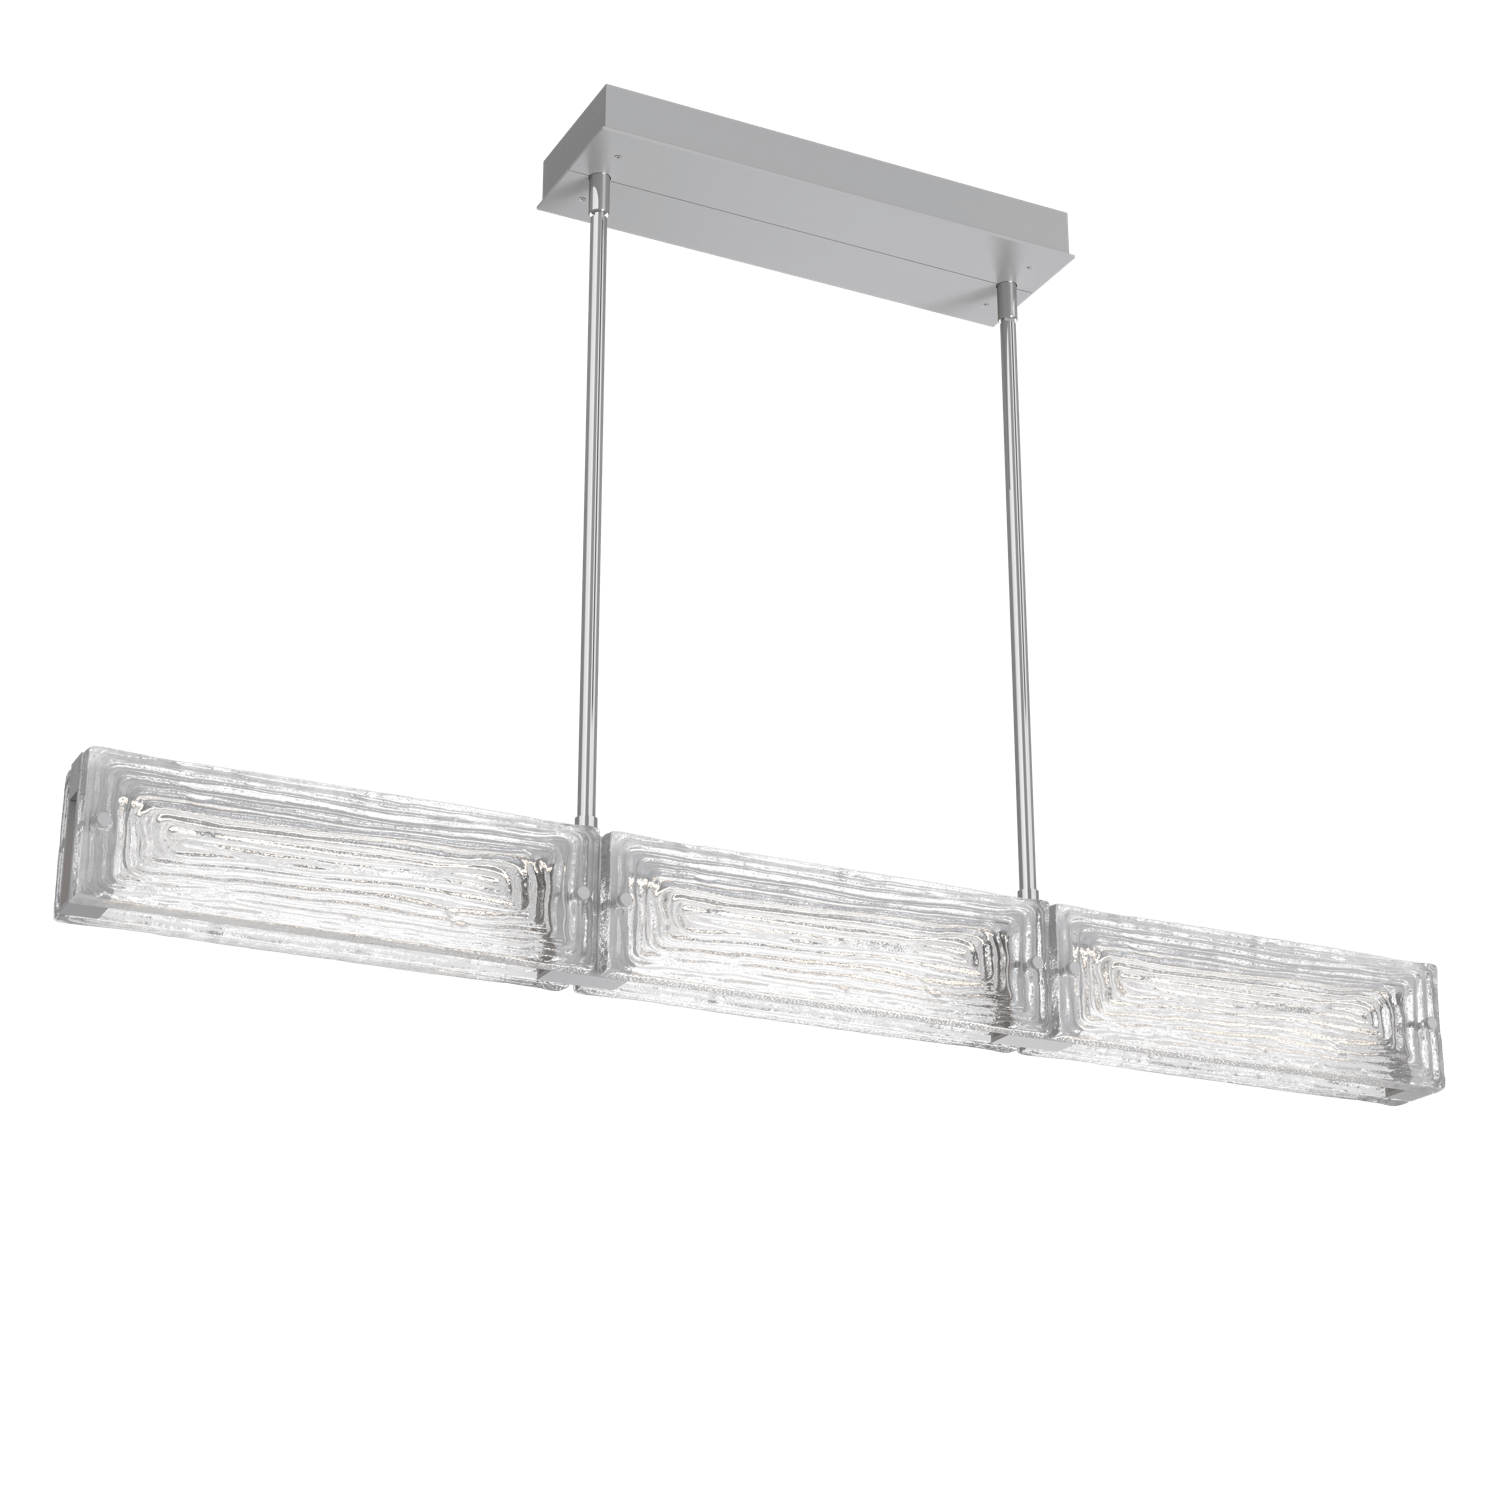 PLB0090-43-CS-TL-Hammerton-Studio-Tabulo-43-inch-linear-chandelier-with-classic-silver-finish-and-clear-linea-cast-glass-shade-and-LED-lamping